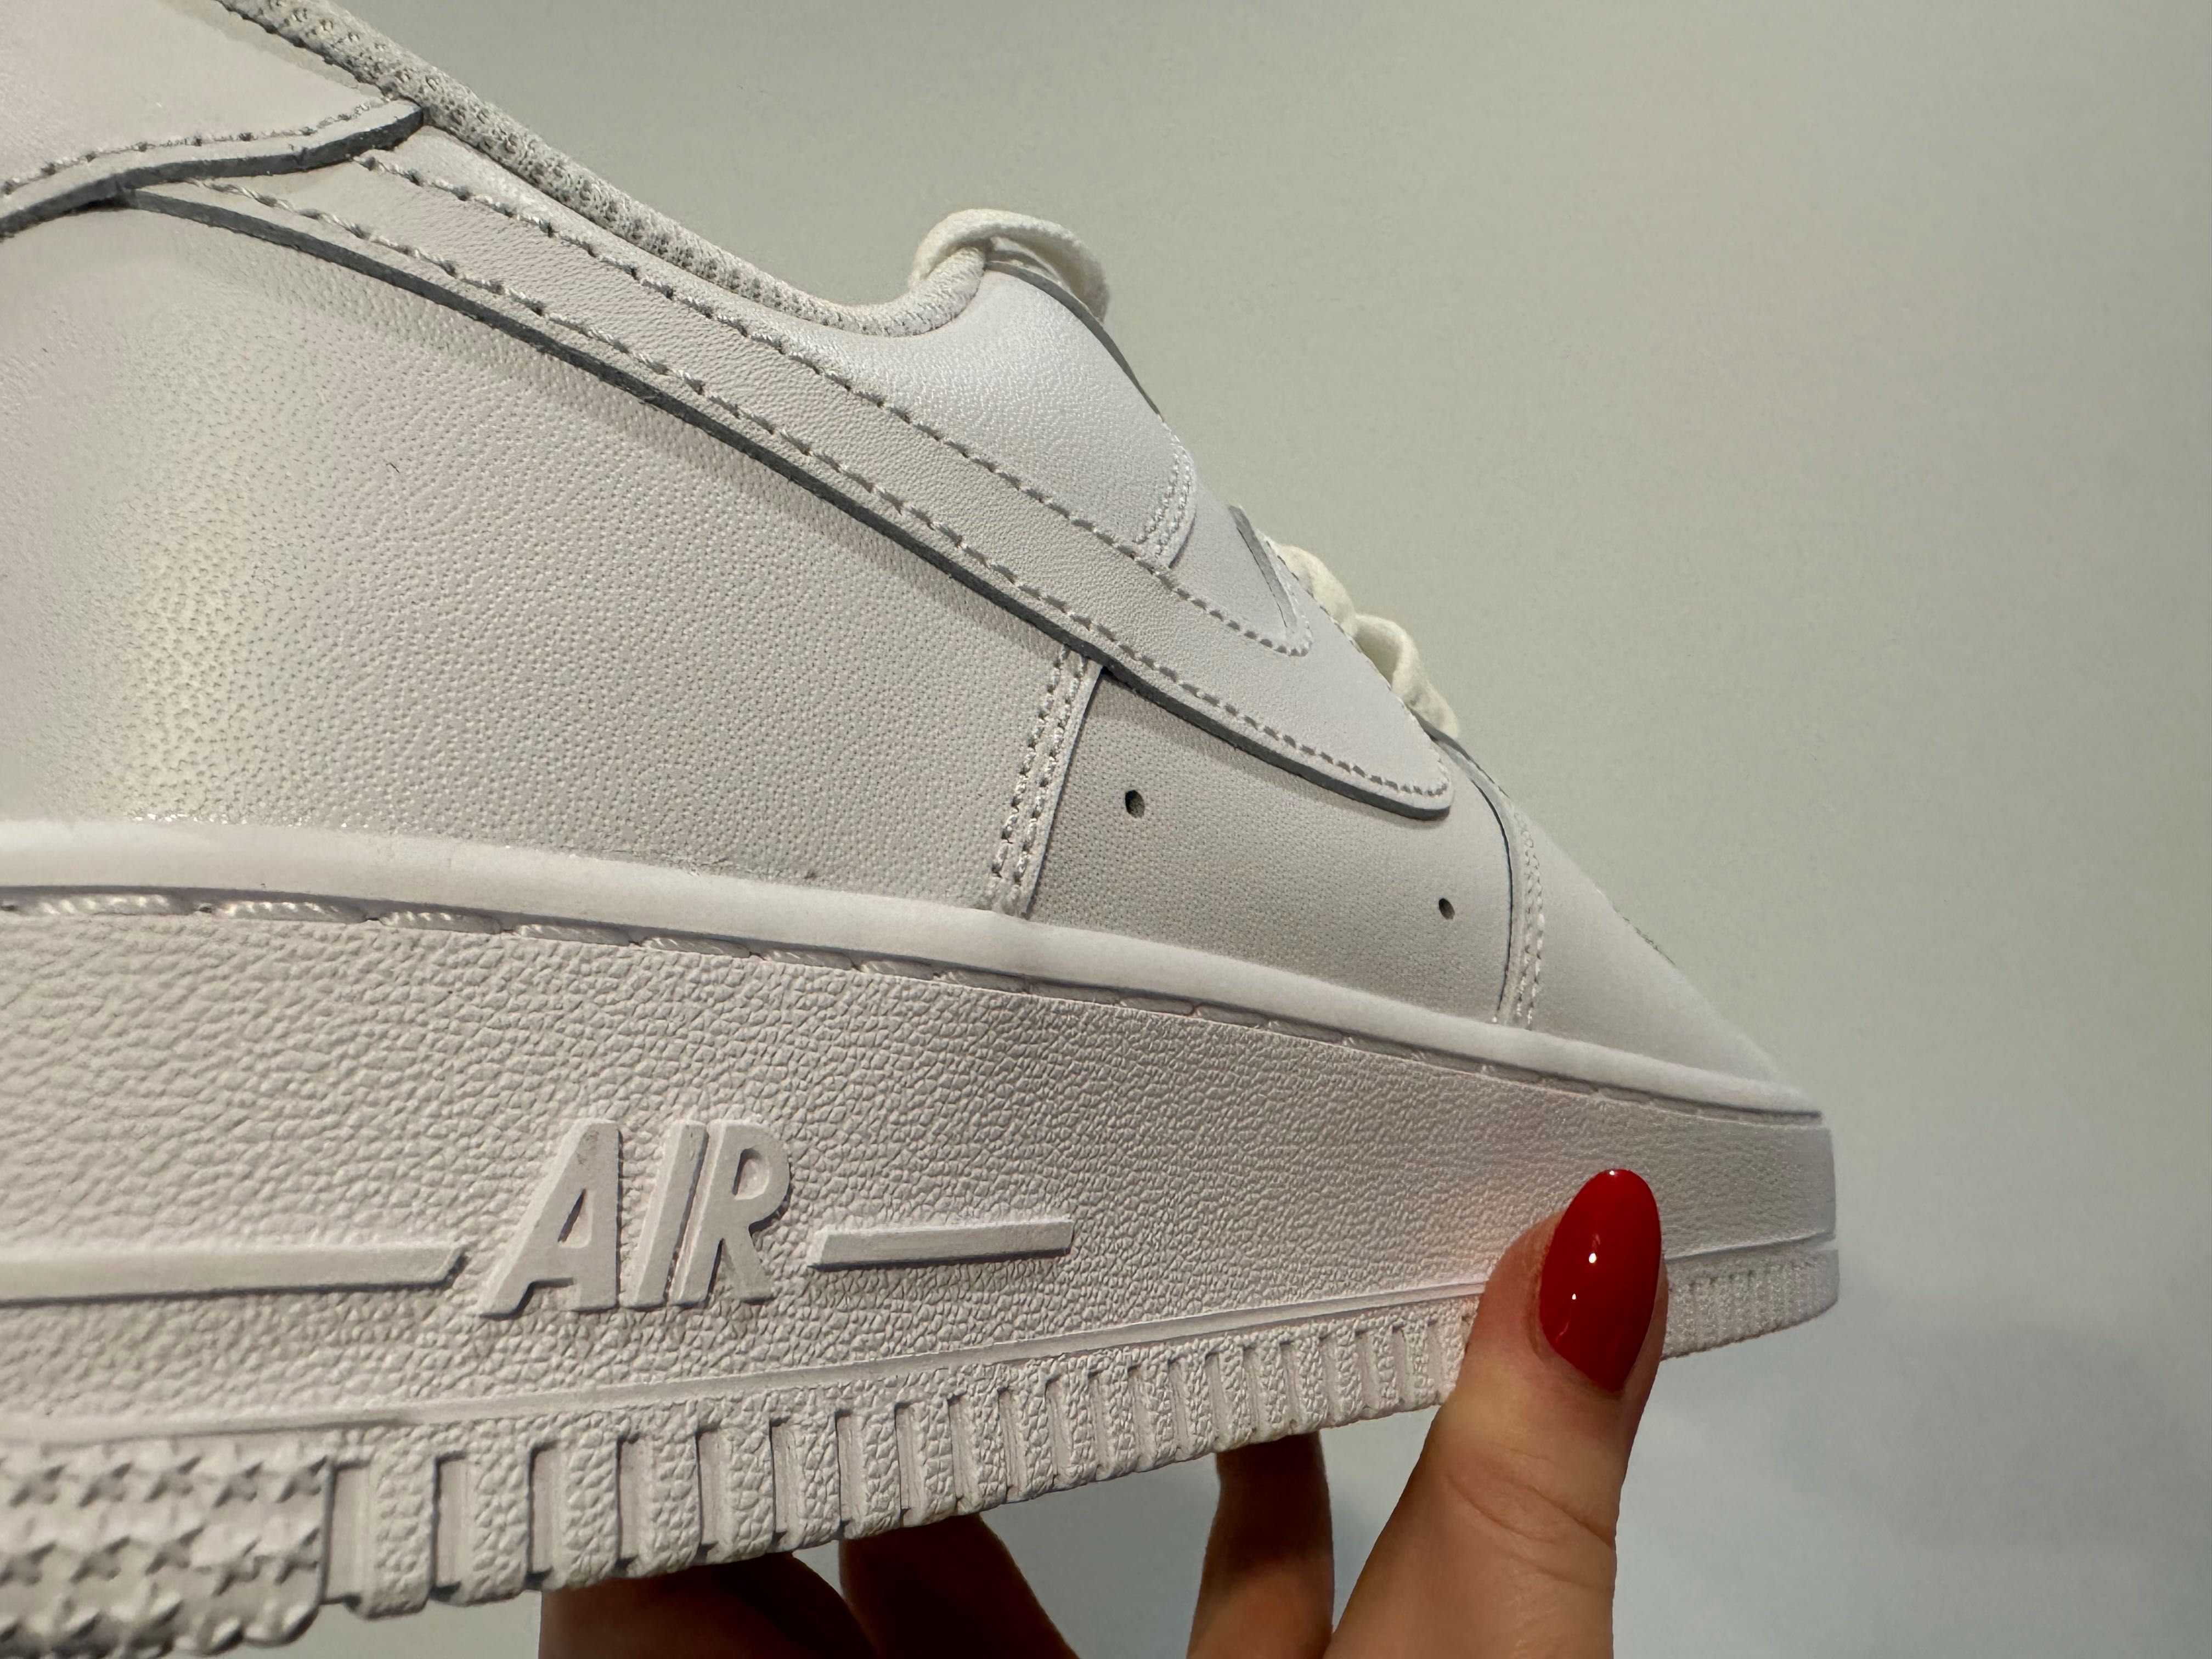 Buty Nike Air Force 1 Low '07 White r. 42,5